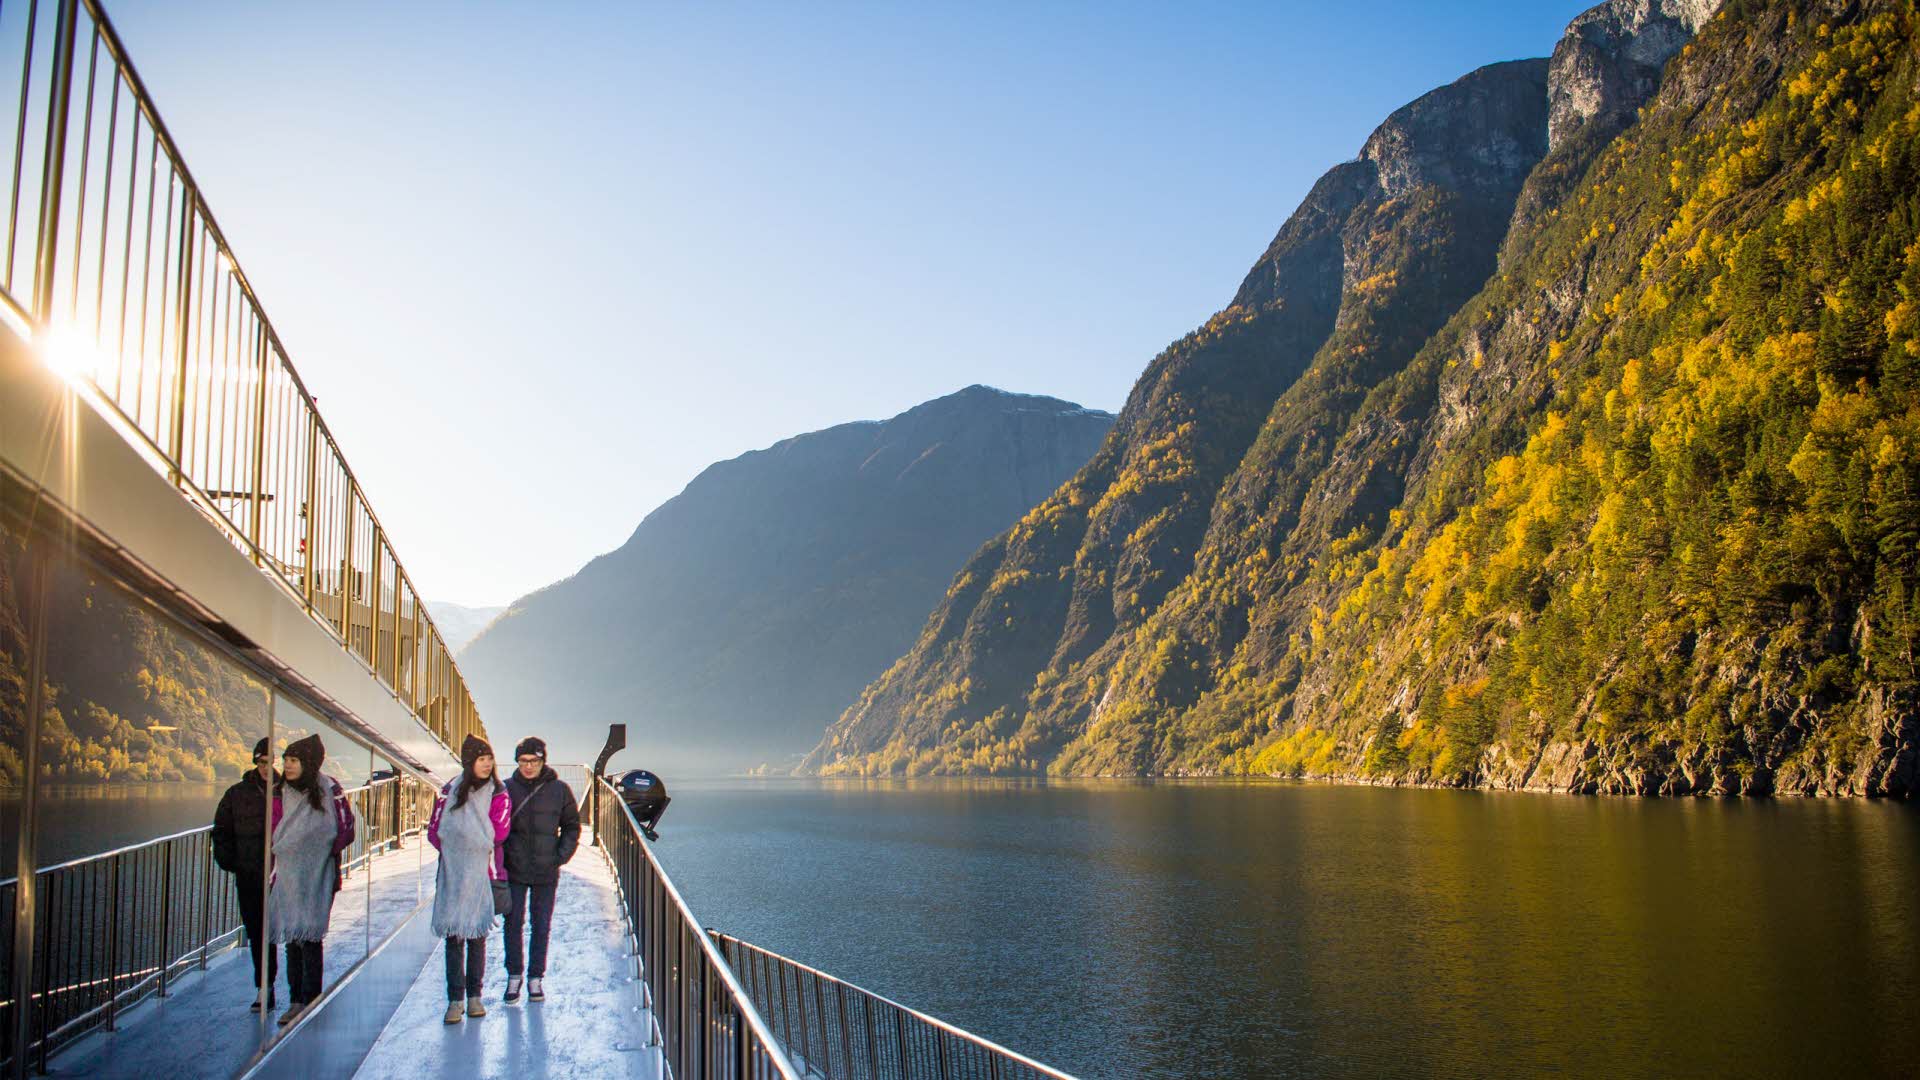 Two people walking down a walkway on a boat sailing by steep mountains on the Nærøyfjord.